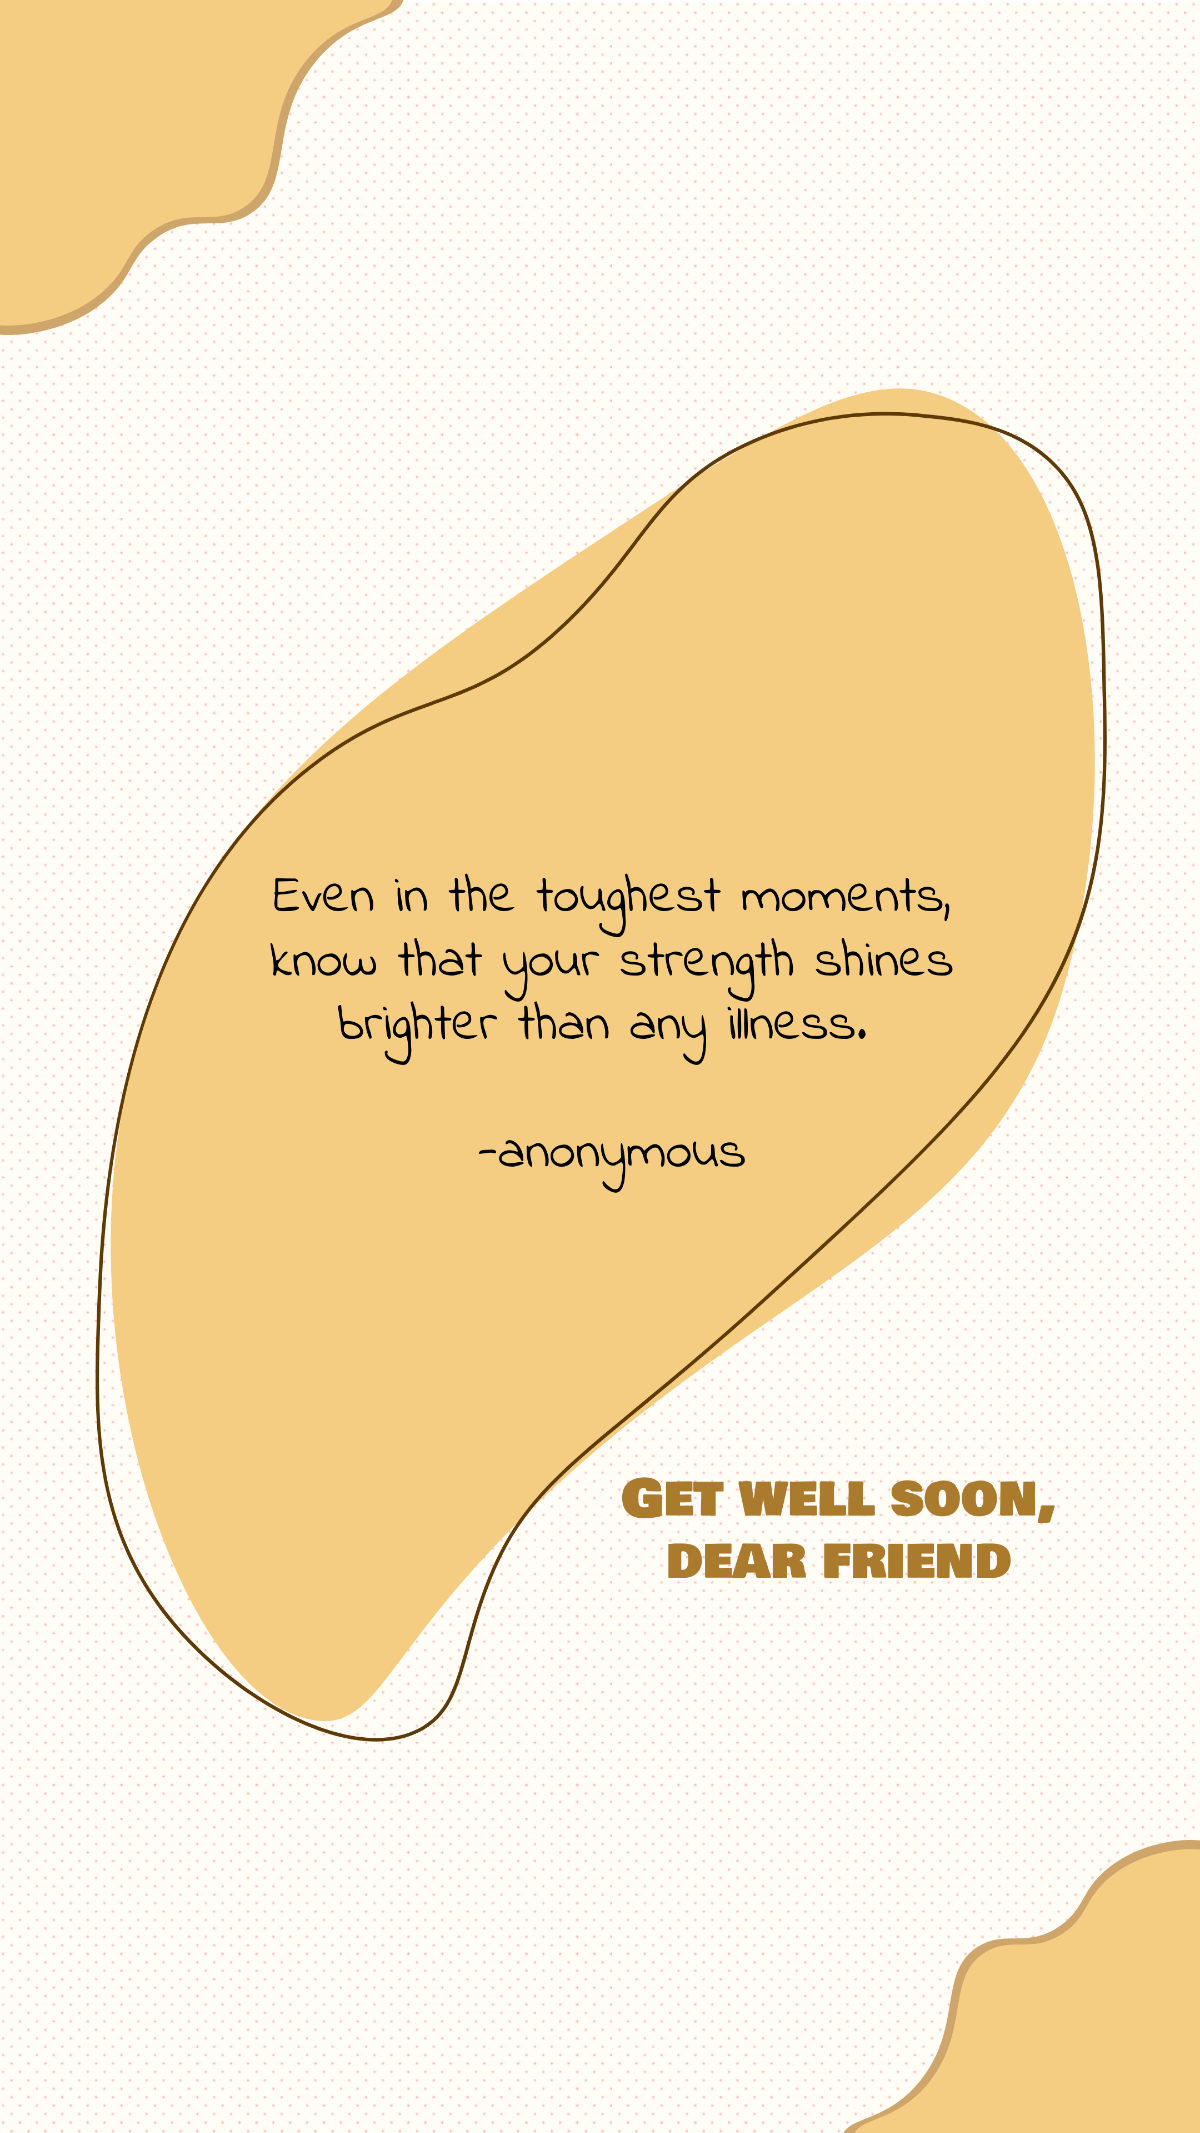 Get Well Soon Quote For Friend